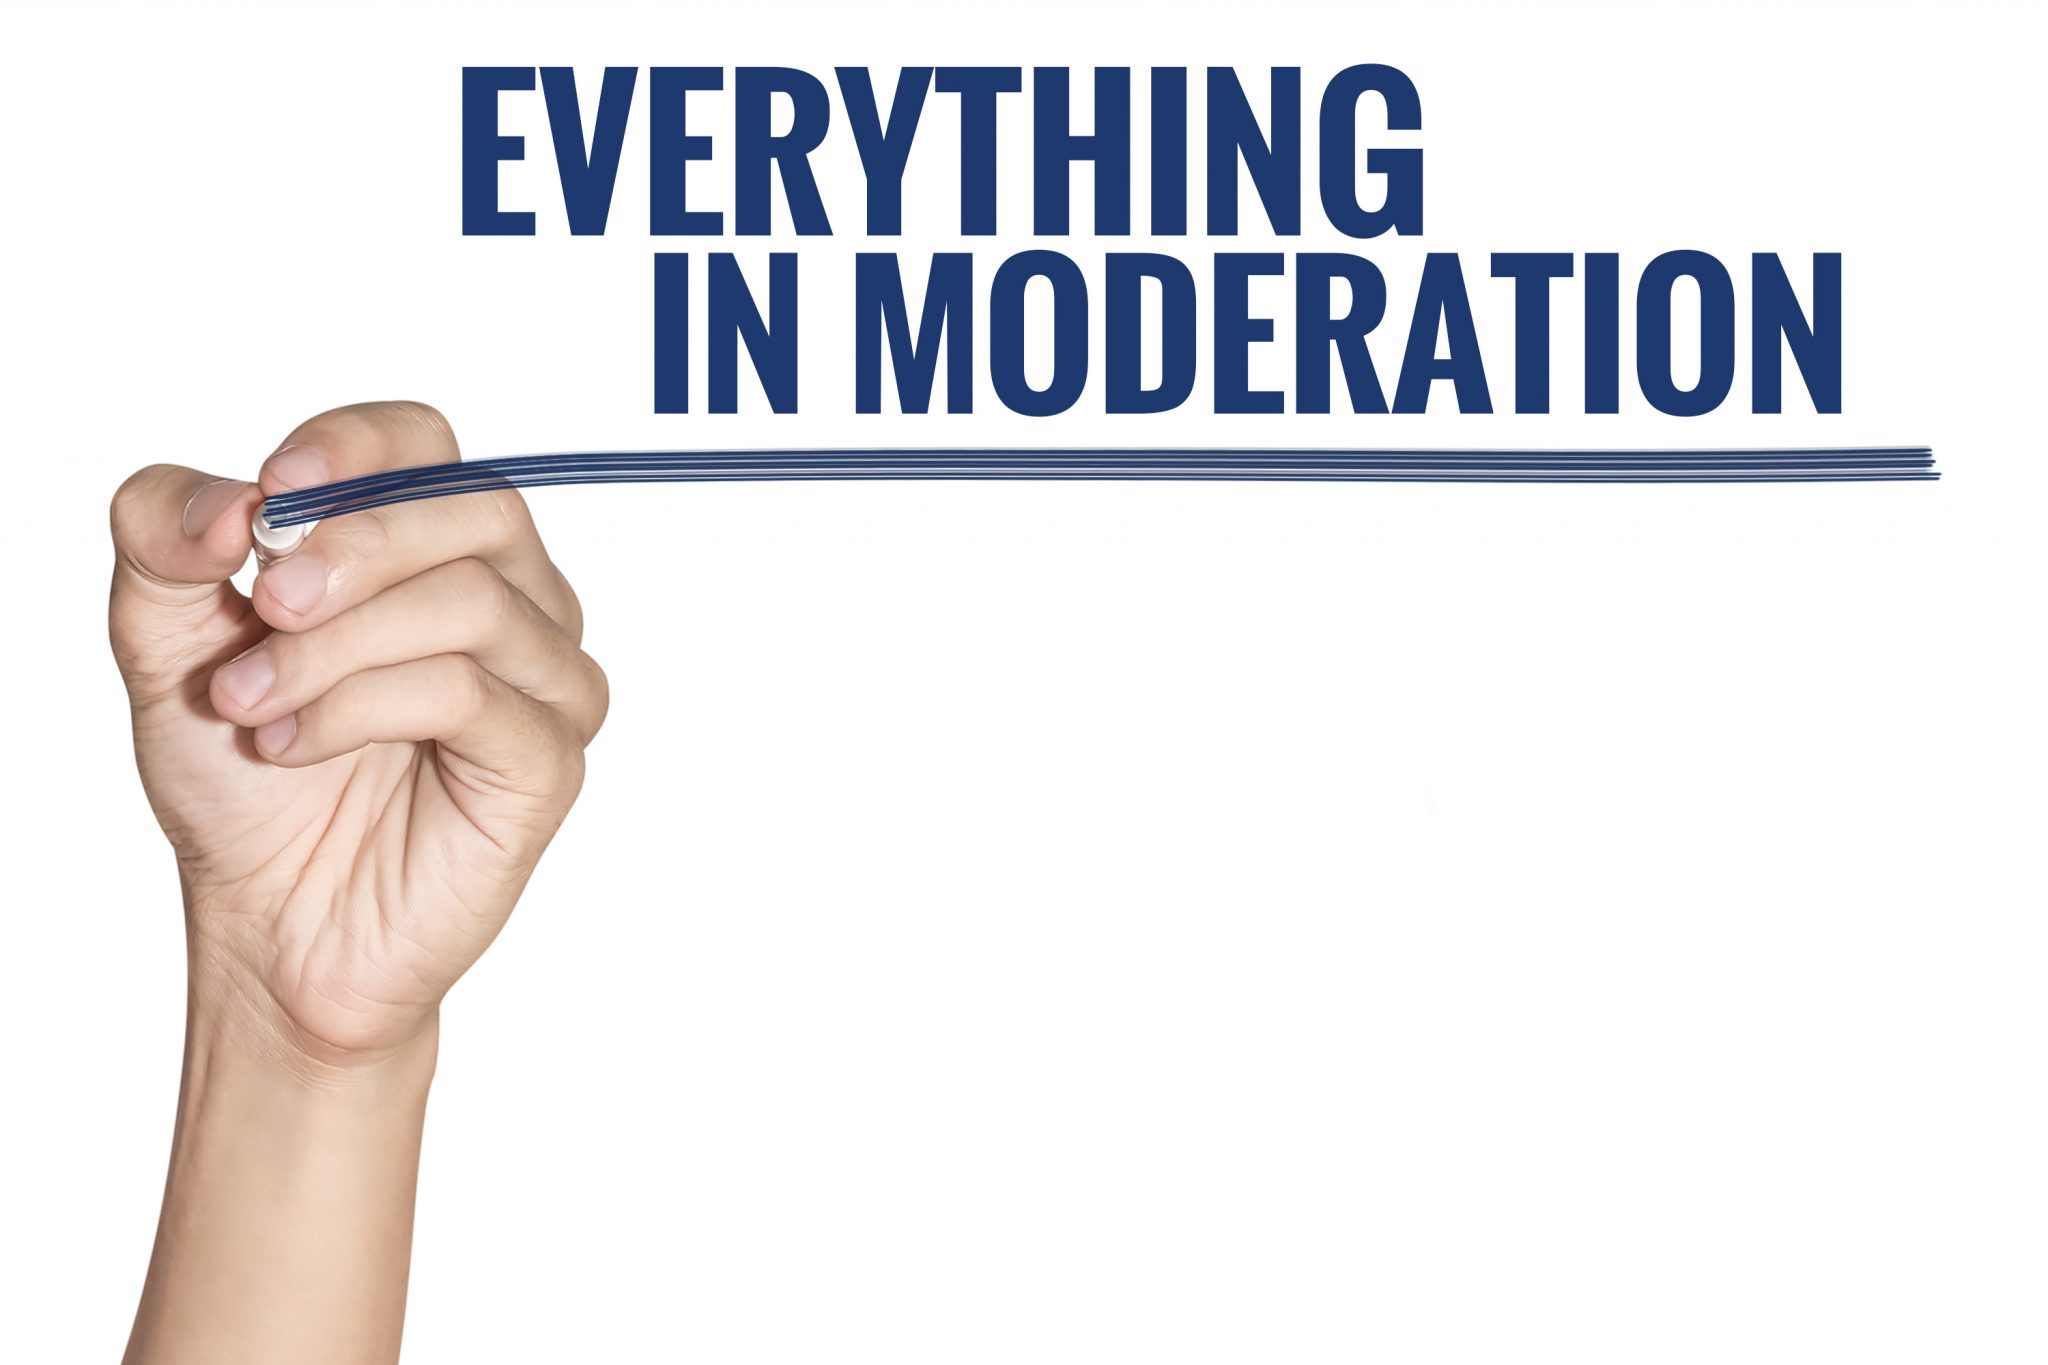 7 Ways to Improve Your Eating Habits with Moderation